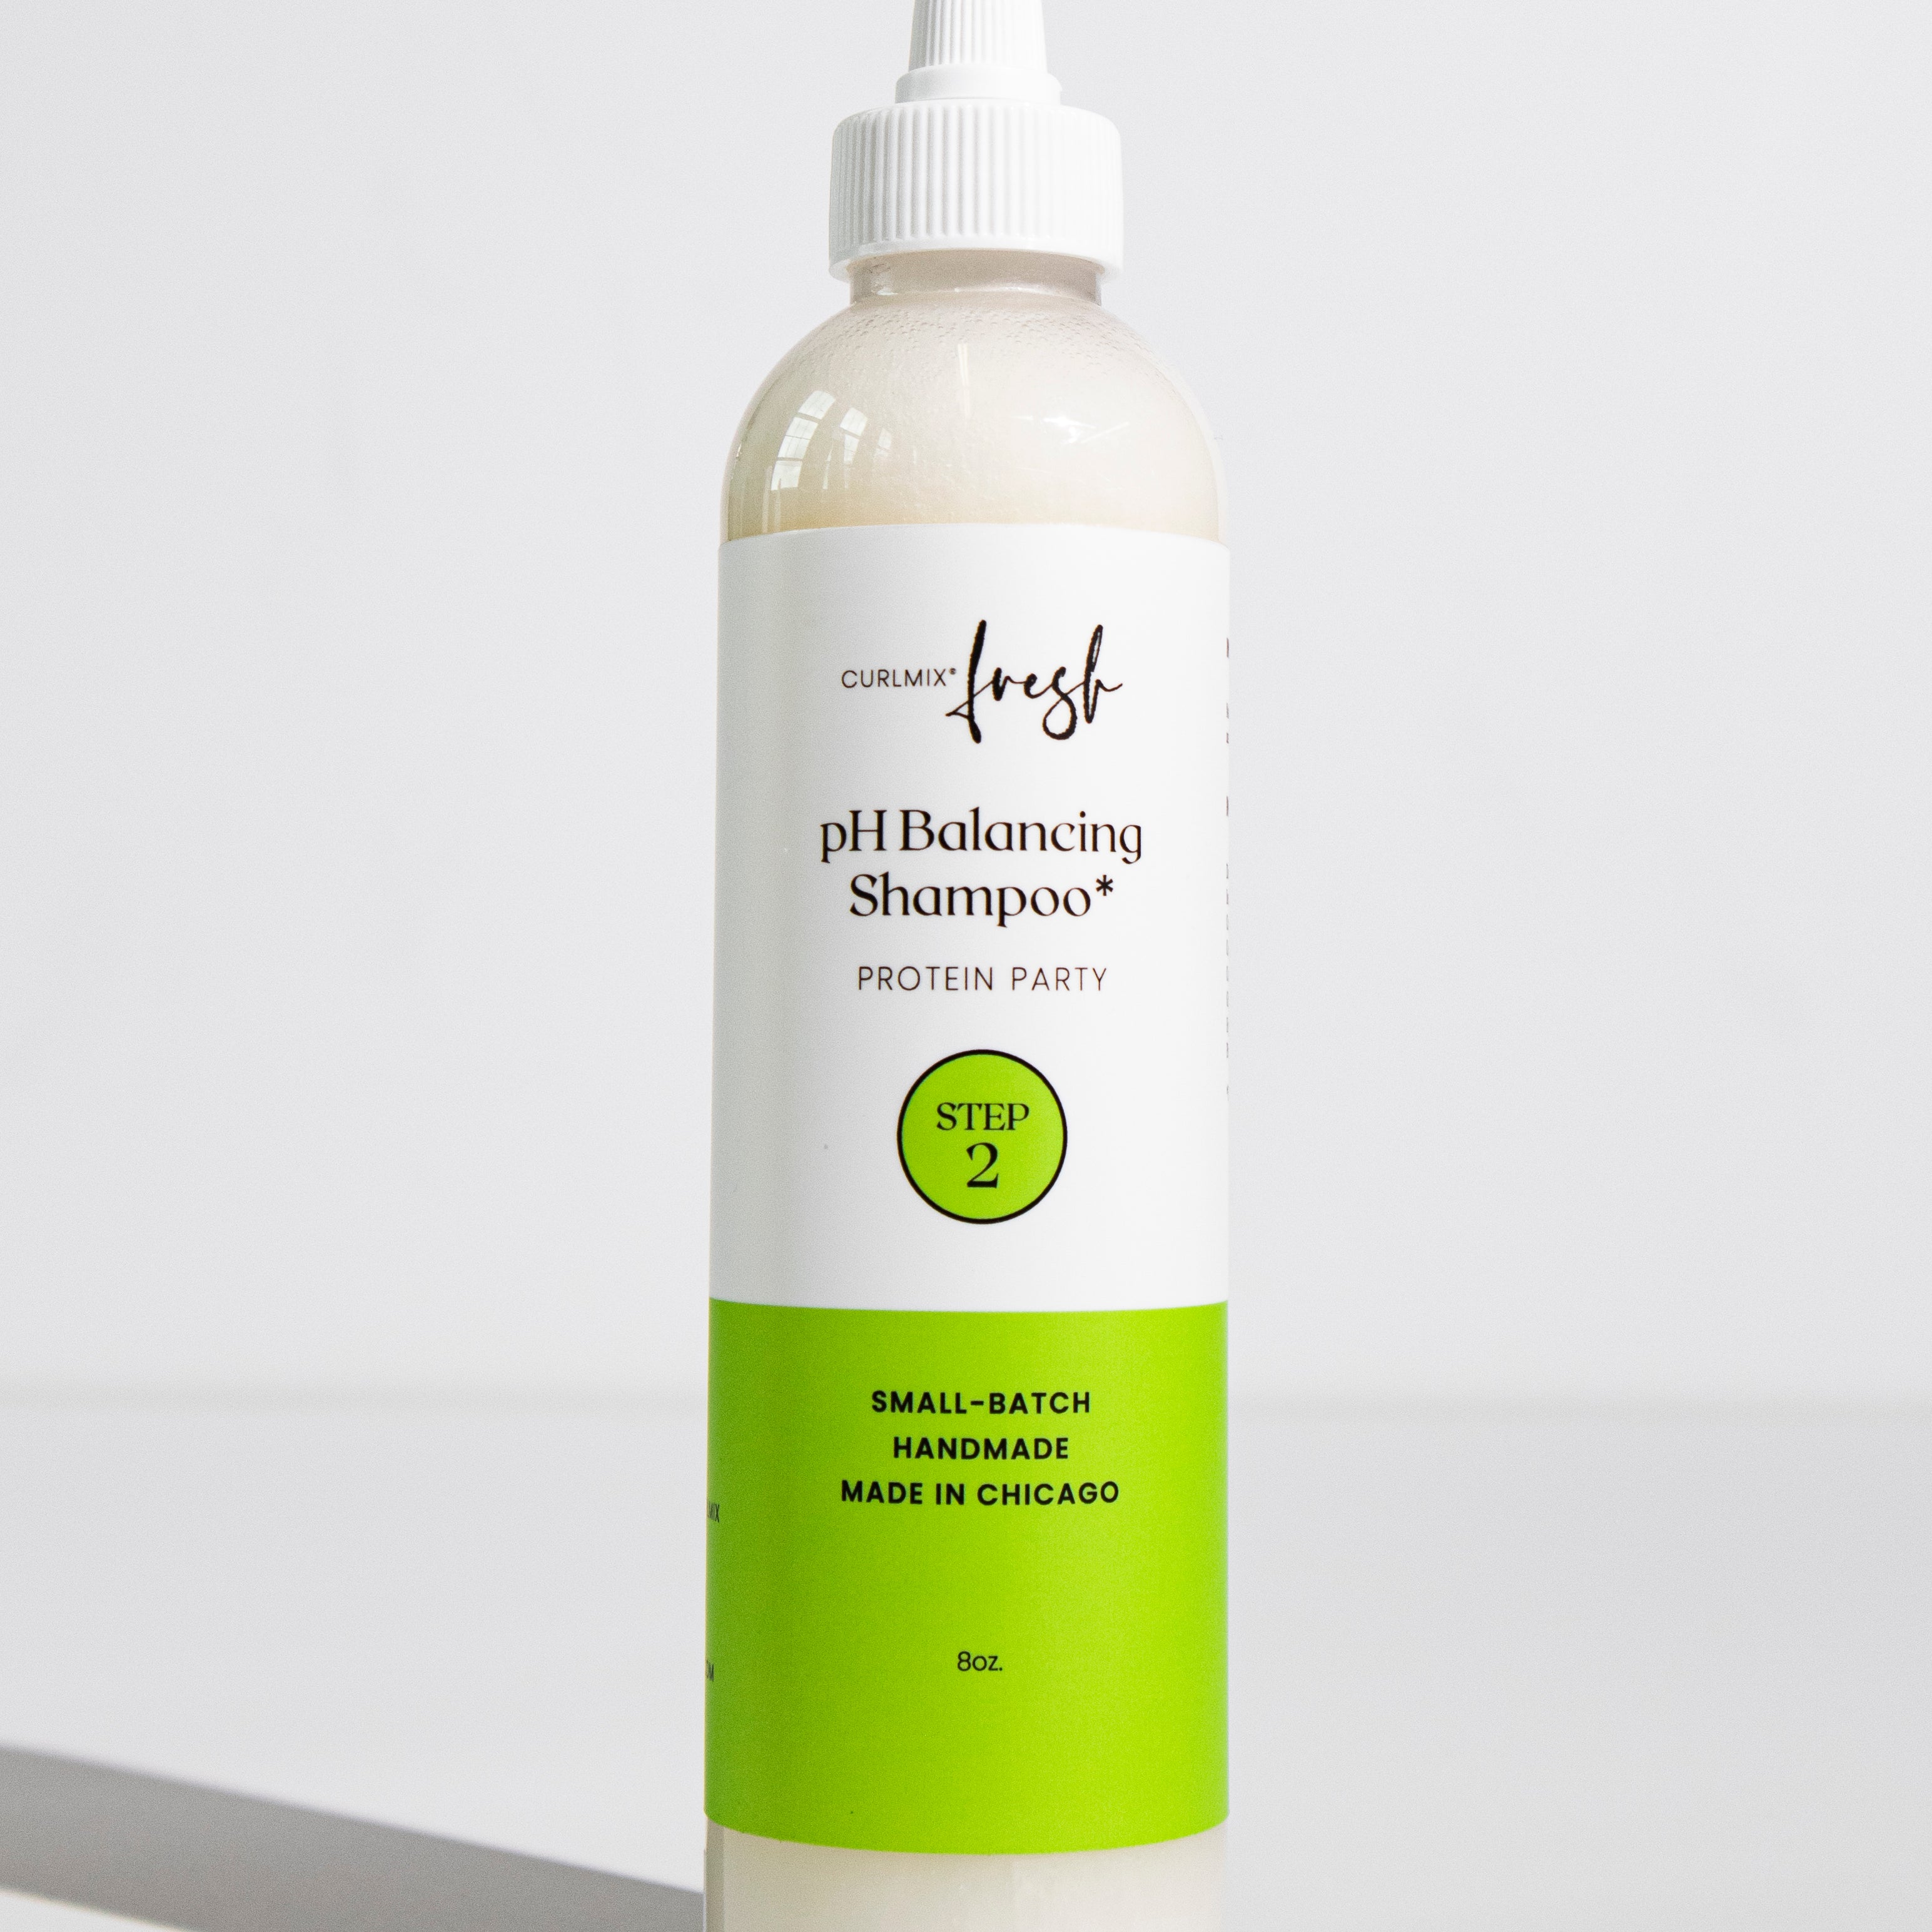 PH Balancing Shampoo - Protein Party - CurlMix